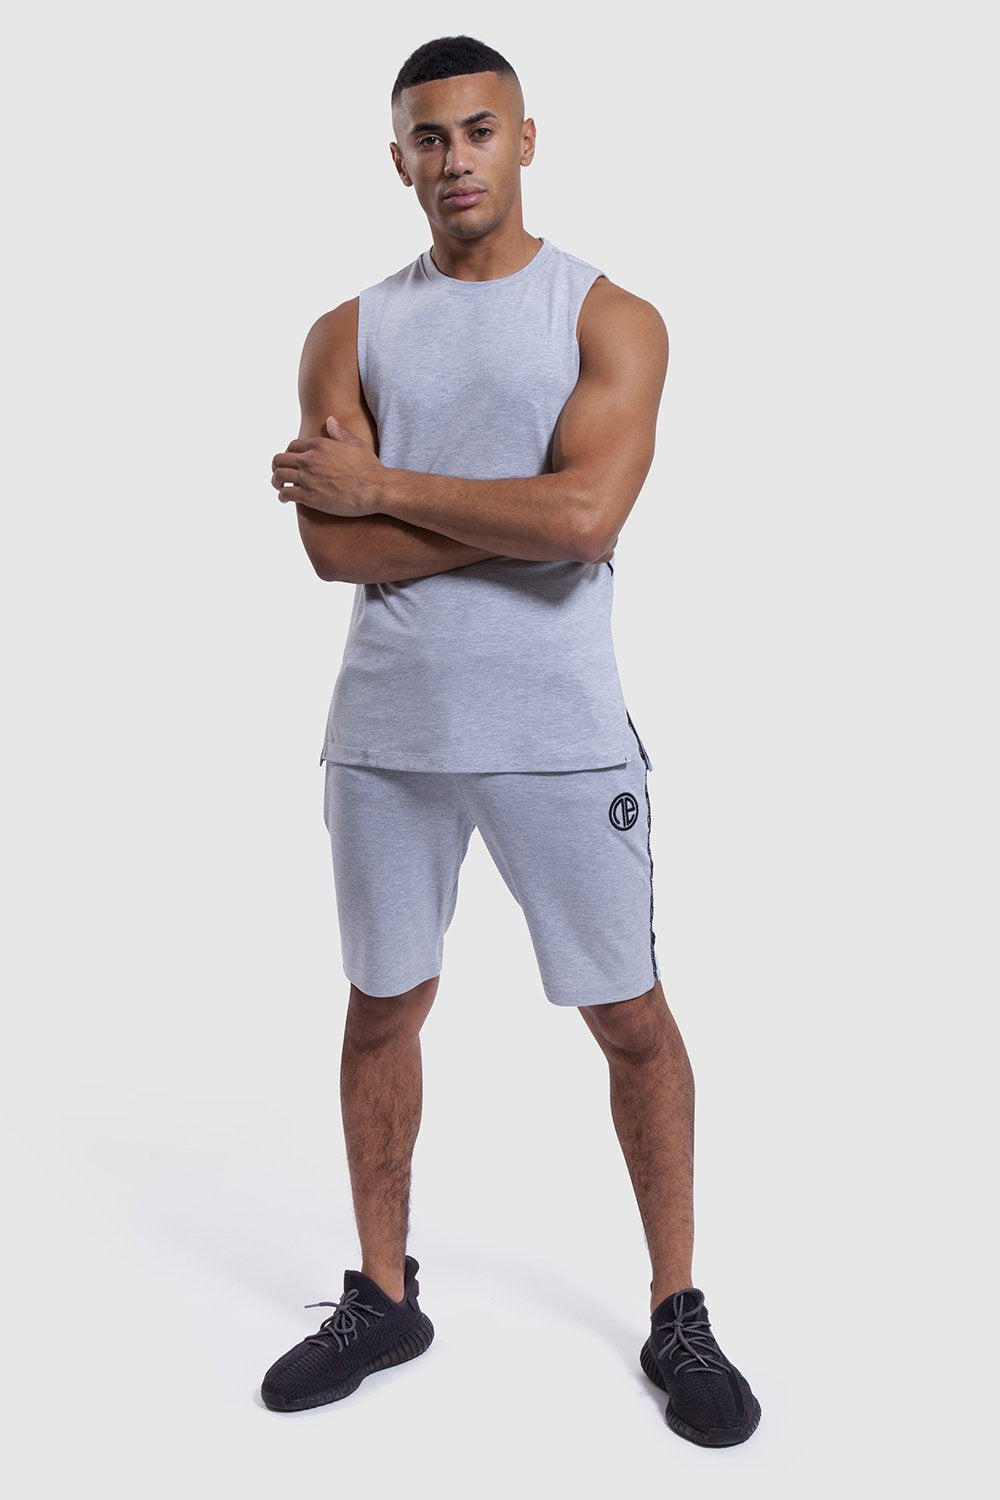 athlete wearing mens gym shorts and vest